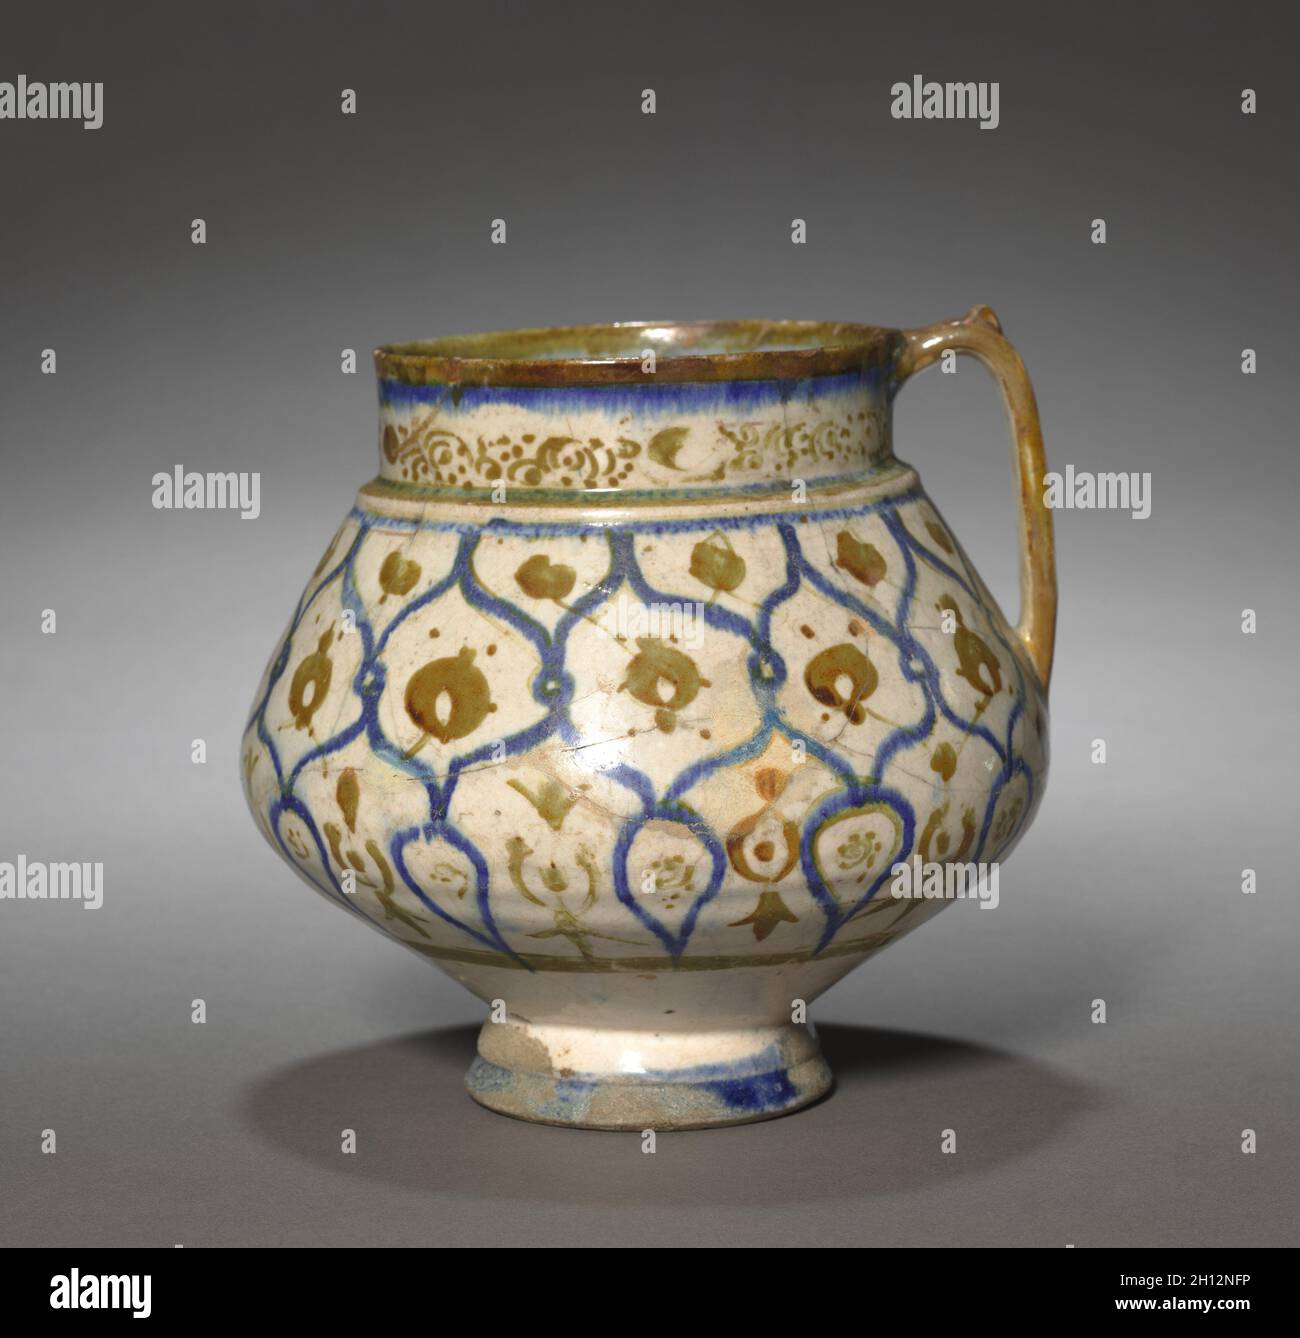 Jug, 1170-1220. Iran, Kashan, Seljuq period of Iran (1037–1194). Fritware with luster-painted design; overall: 14.7 x 17 cm (5 13/16 x 6 11/16 in.). Stock Photo